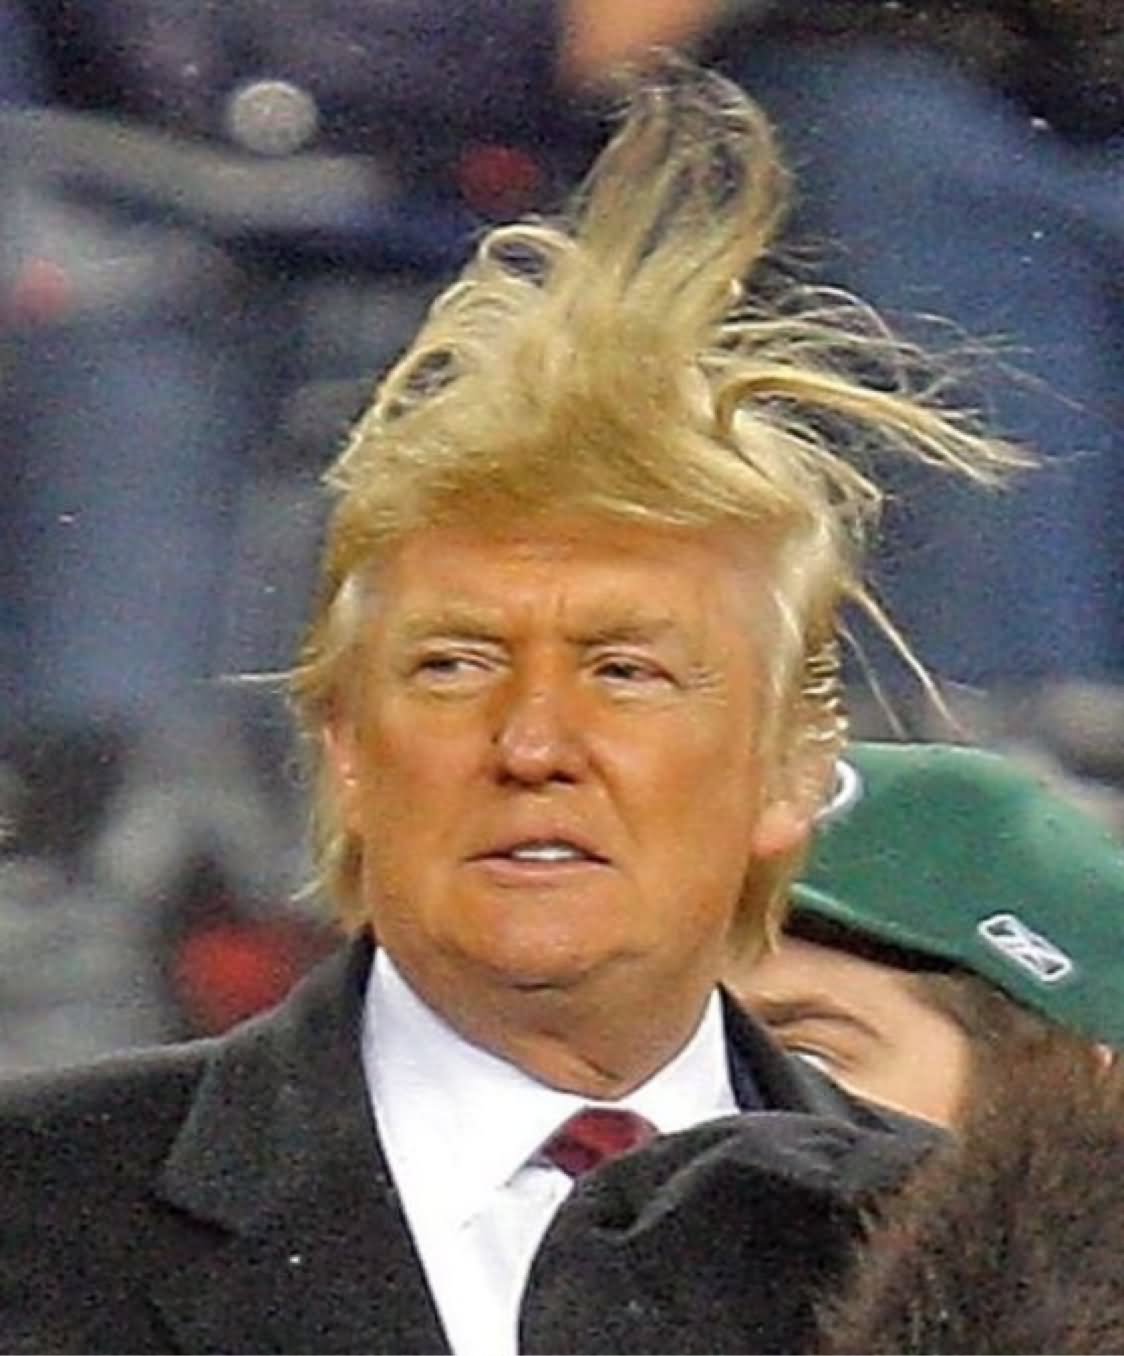 Donald-Trump-With-Blowing-Hair-Funny-Image.jpg